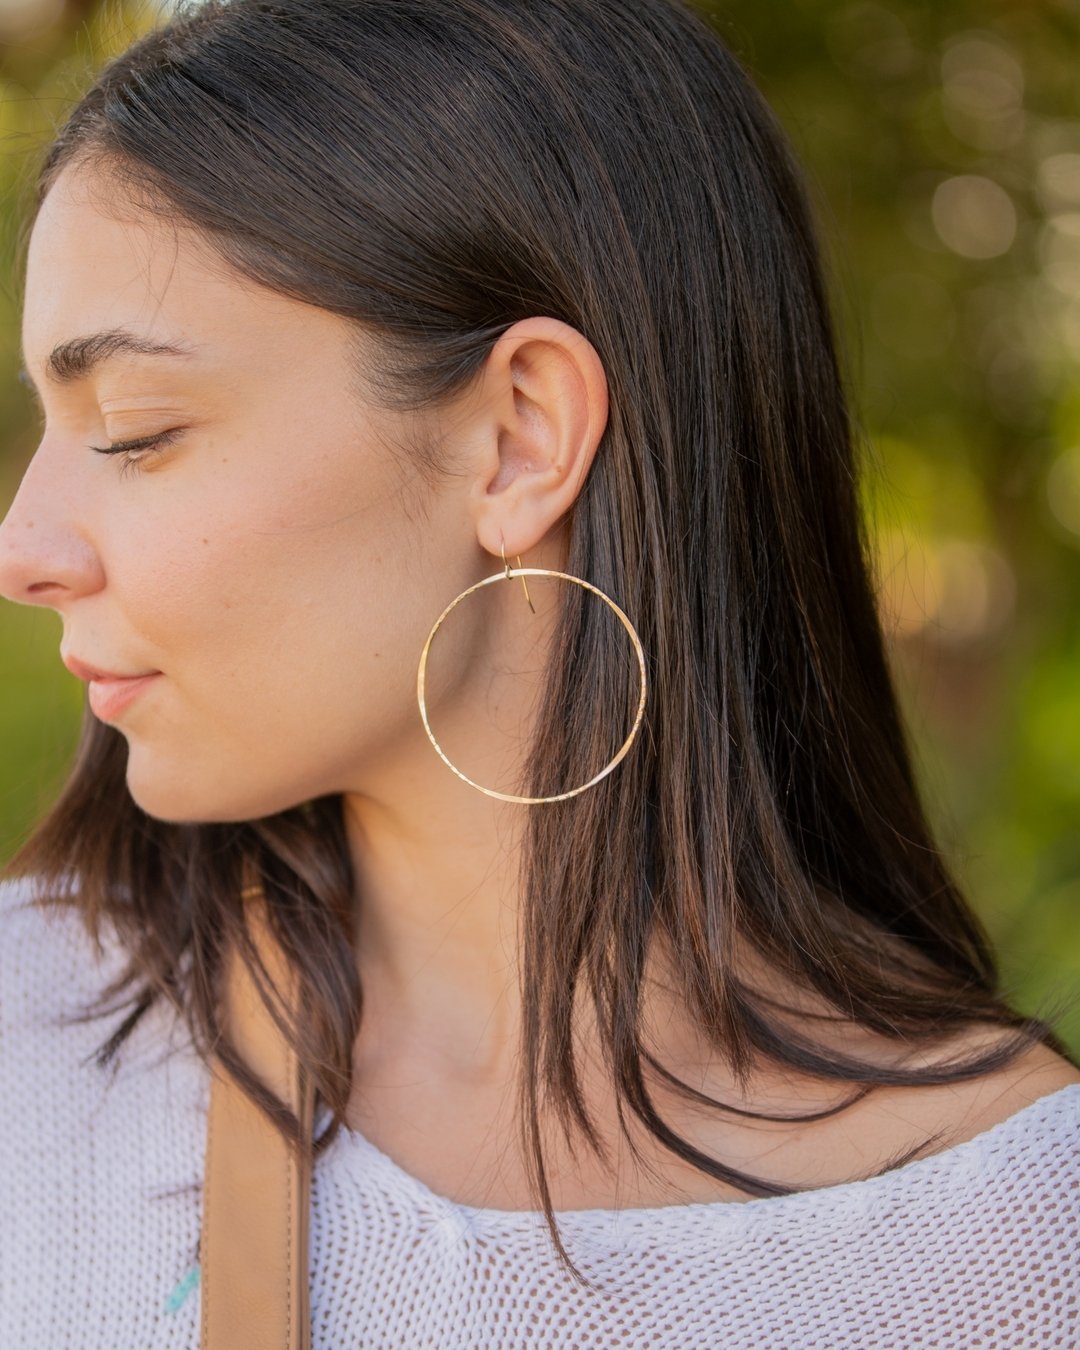 Never Enough Hoops  #jewelry #musthave #accessories #boutiquebuys #trendyjewelry #shopsmall #islamorada #islamoradashopping